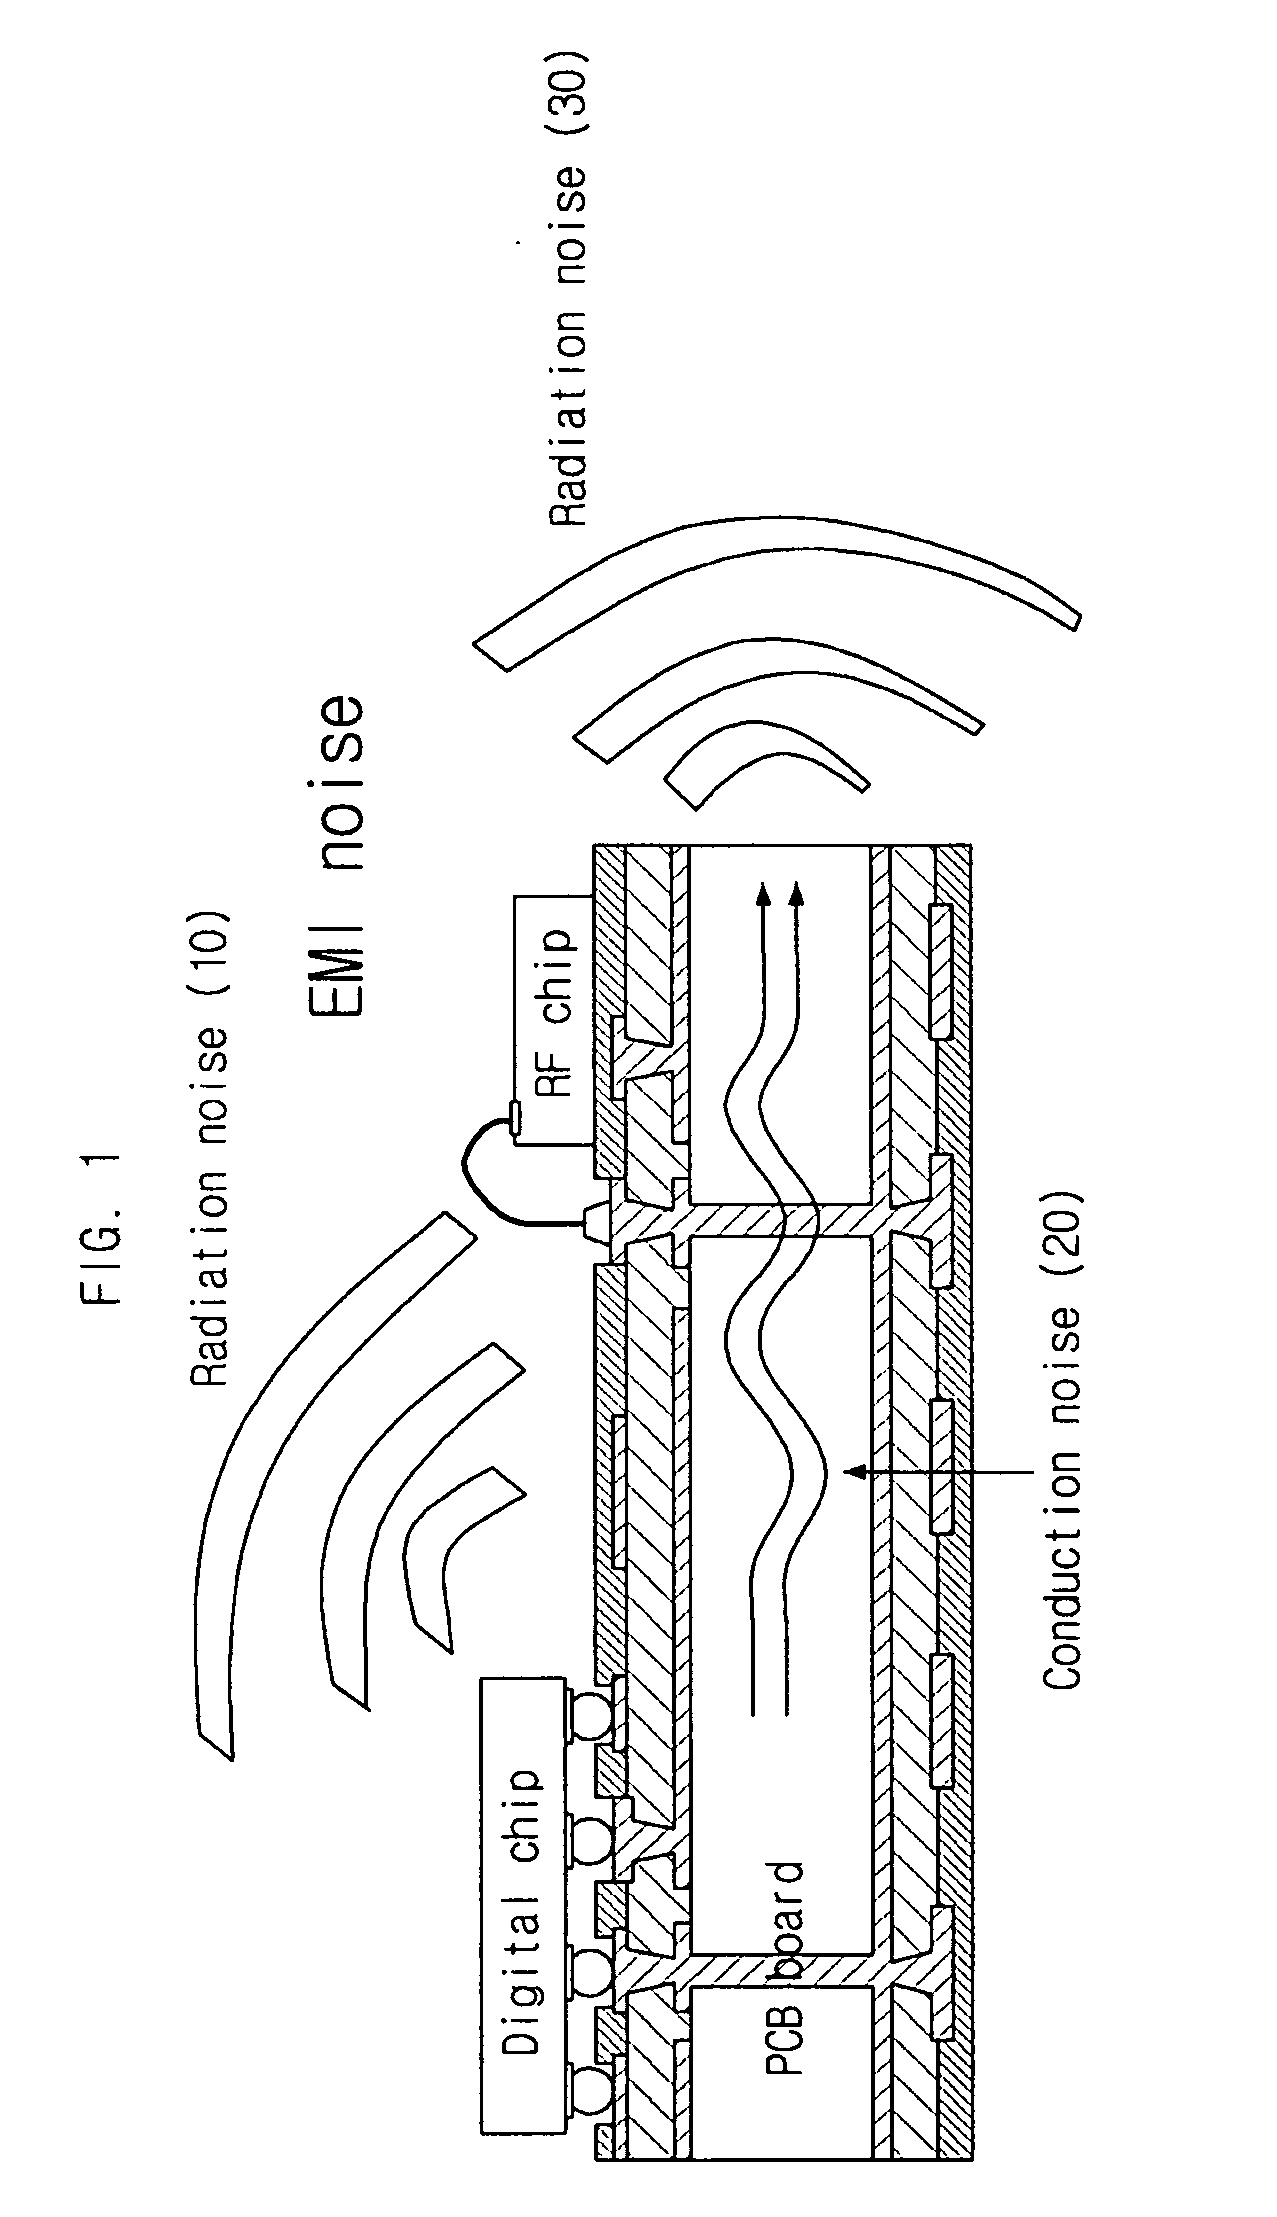 Printed circuit board and electro application